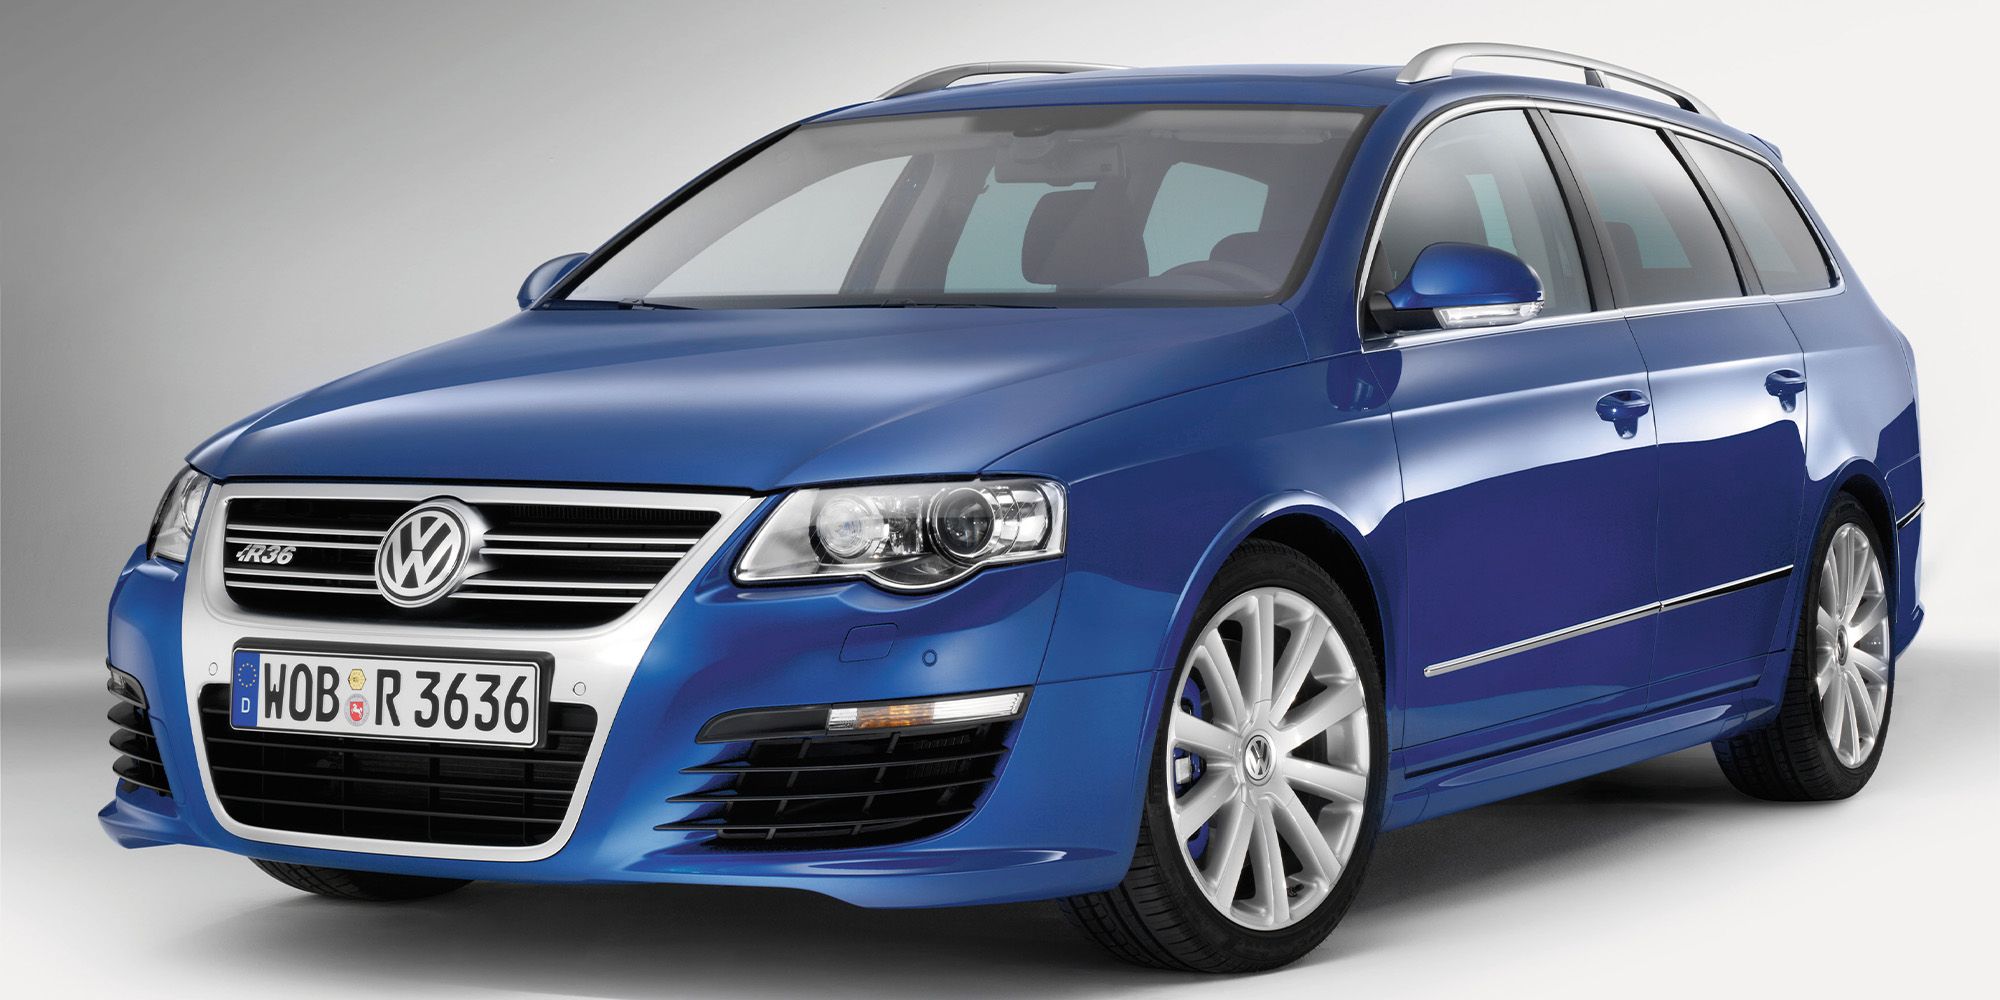 The front of the Passat R36 wagon